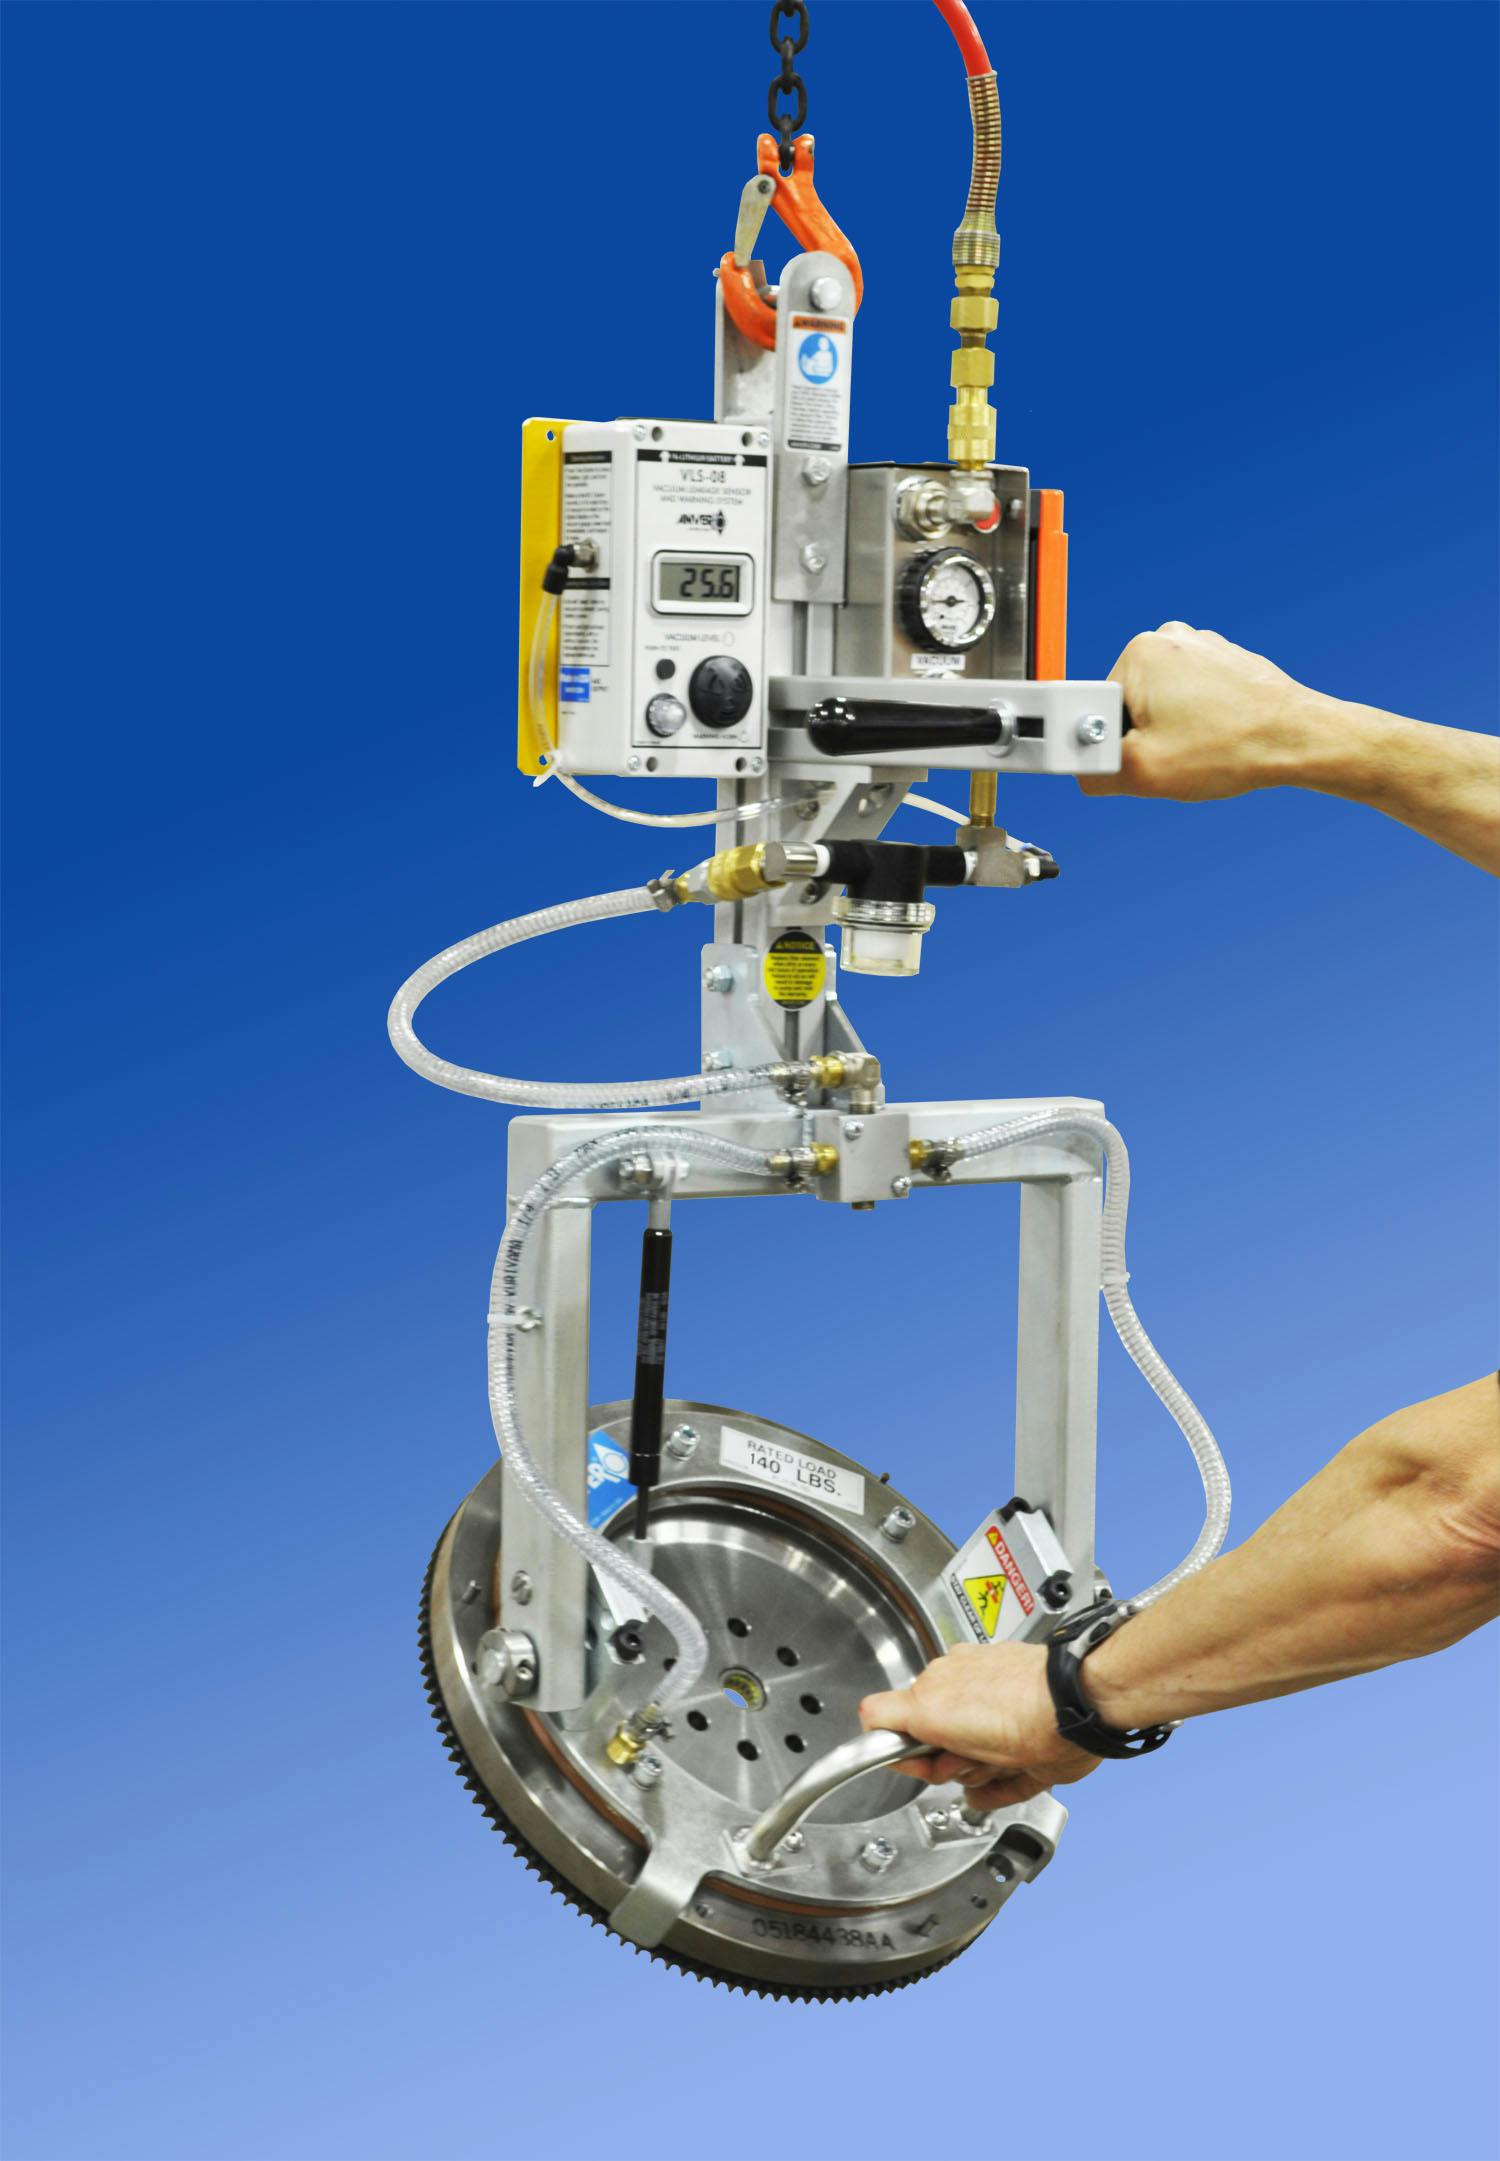 Anver Corp. Releases Vacuum Lifter with Manual Tilting